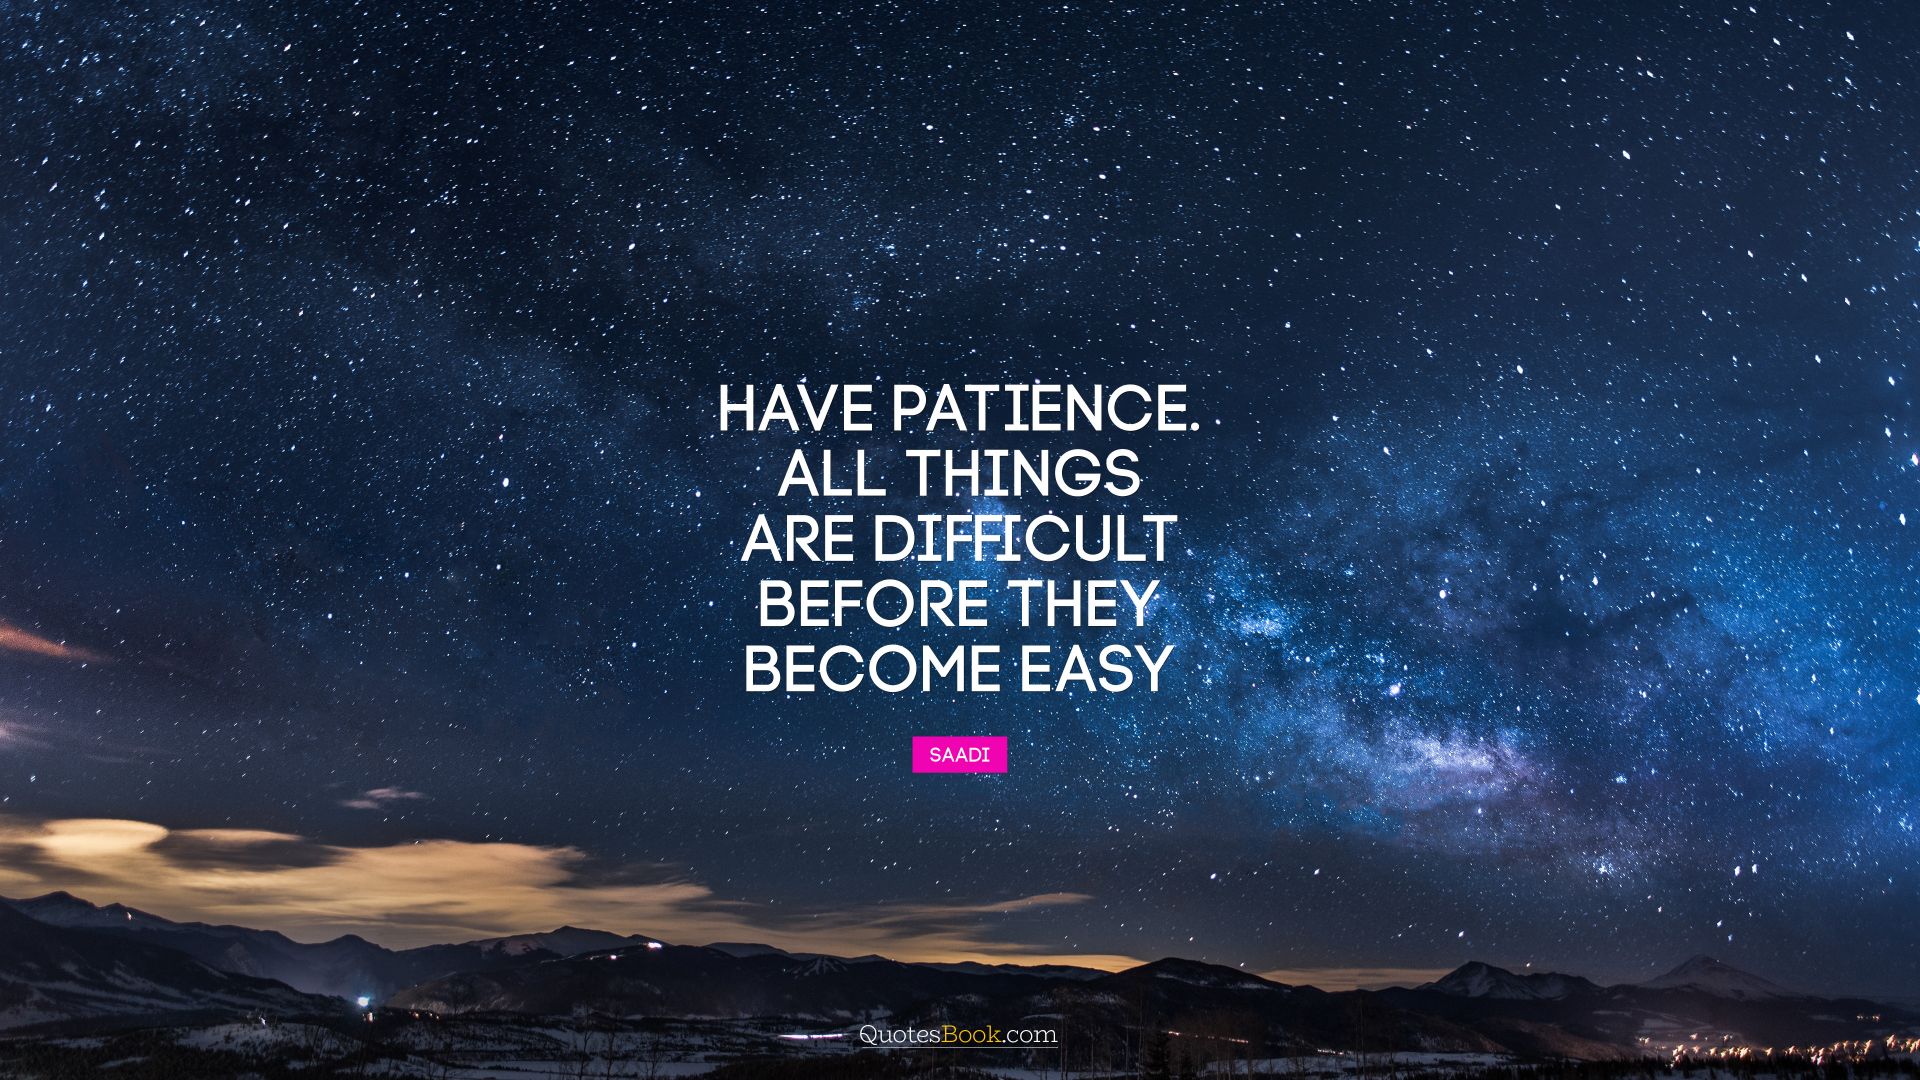 Have patience. All things are difficult before they become easy. - Quote by Saadi